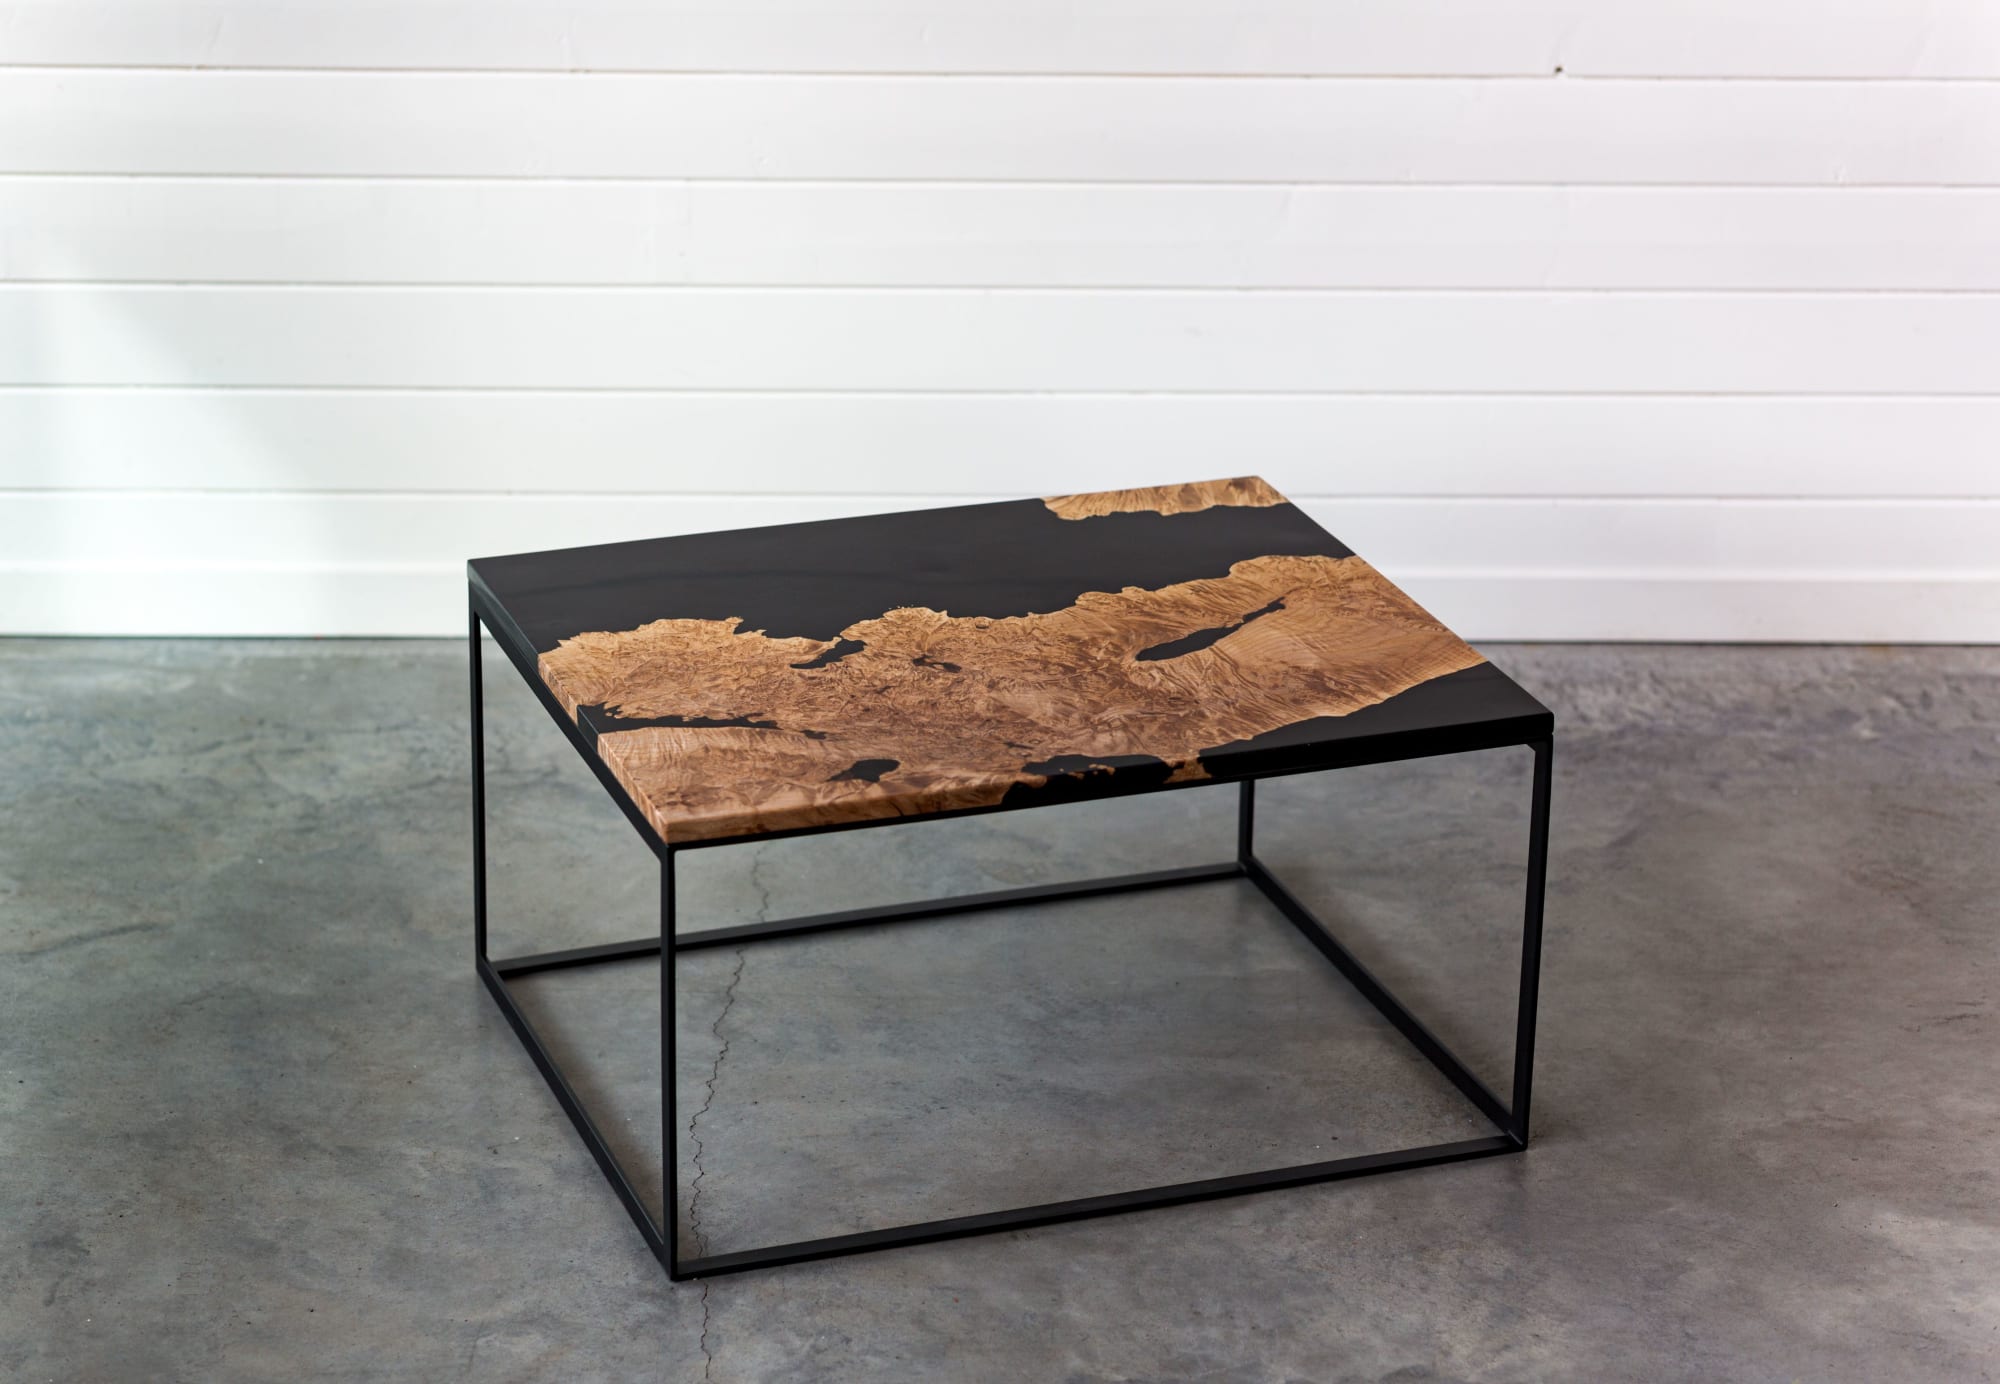 I reckon Exactly Bring Maple Burl Live Edge Resin Coffee Table | Steel Base | Handmade | Modern  Furniture by SAW Live Edge at SAW Live Edge Studio, Kimberley | Wescover  Tables